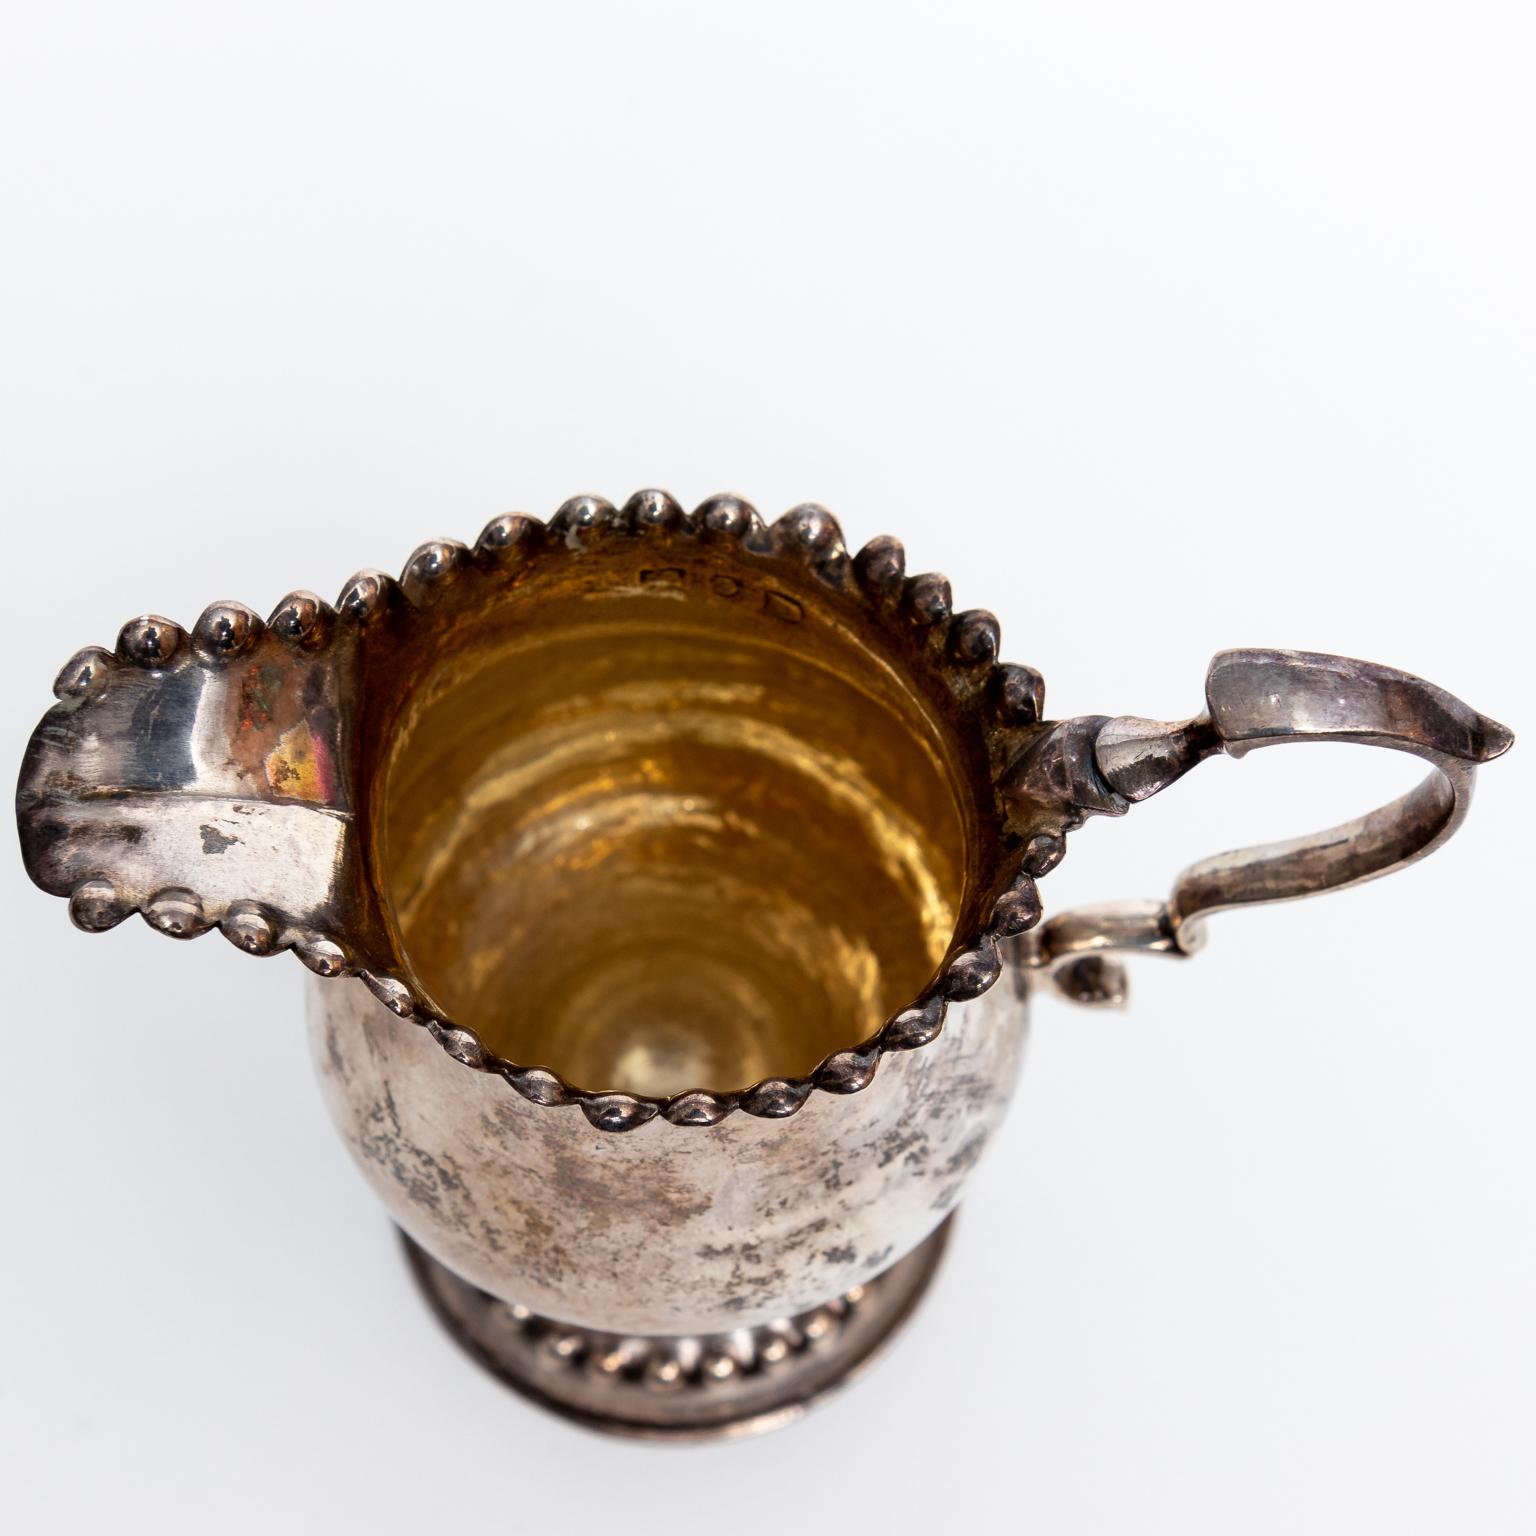 Sterling creamer was made in London in the 18th century. It appears manufactured by hand. Weighs 84 grams. Please note of wear consistent with age.